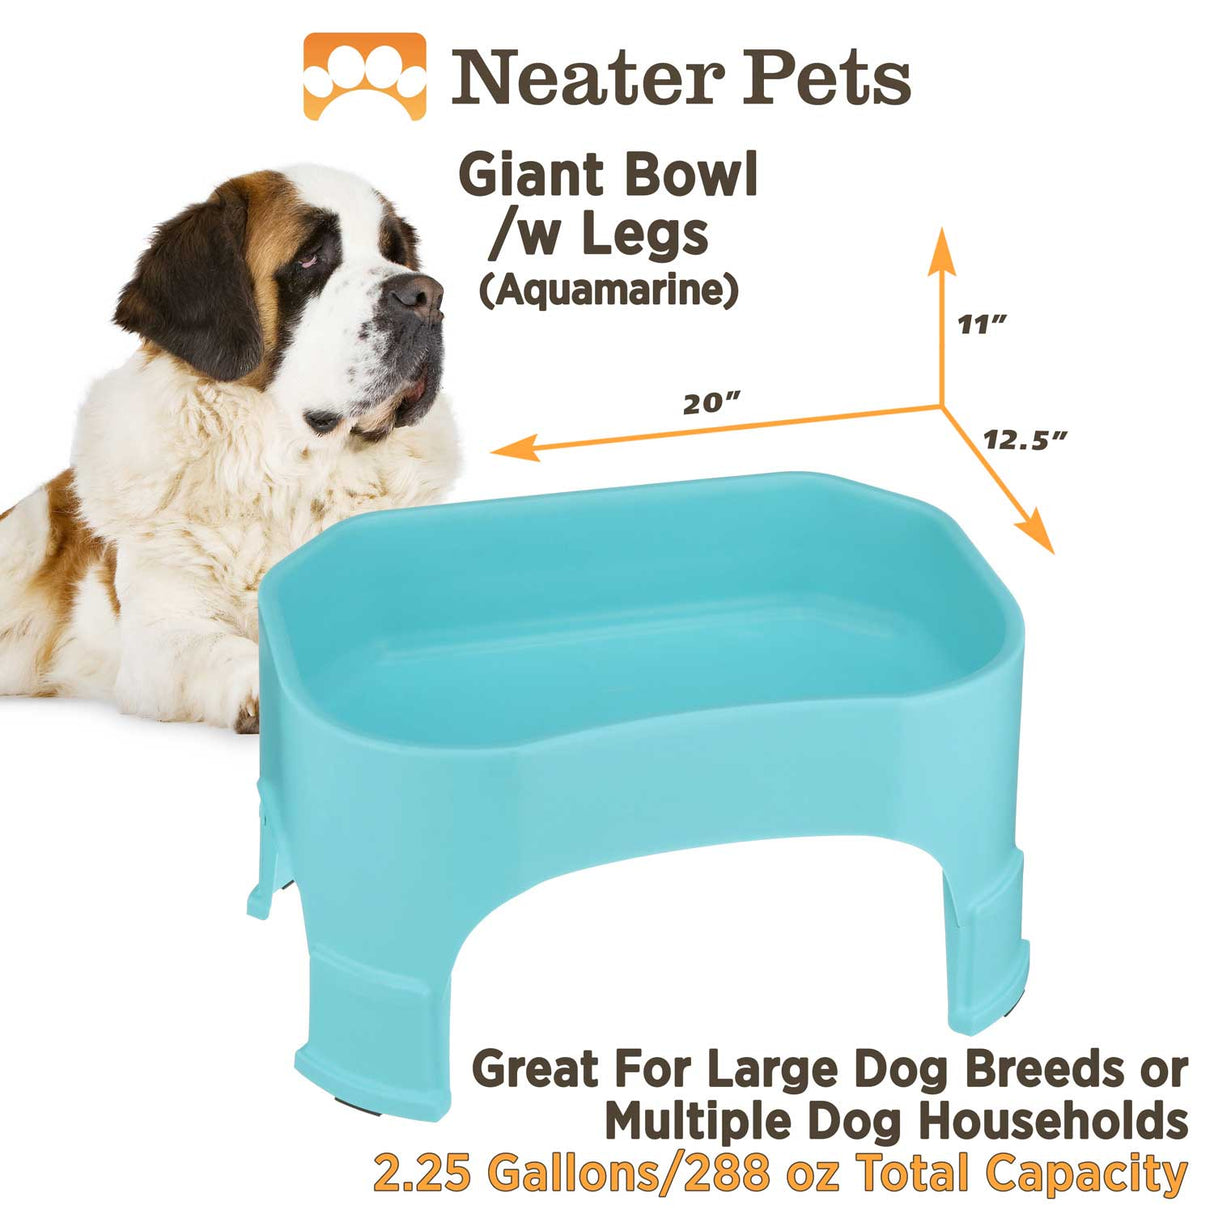 Giant Bowl in Aqua with leg extensions dimensions